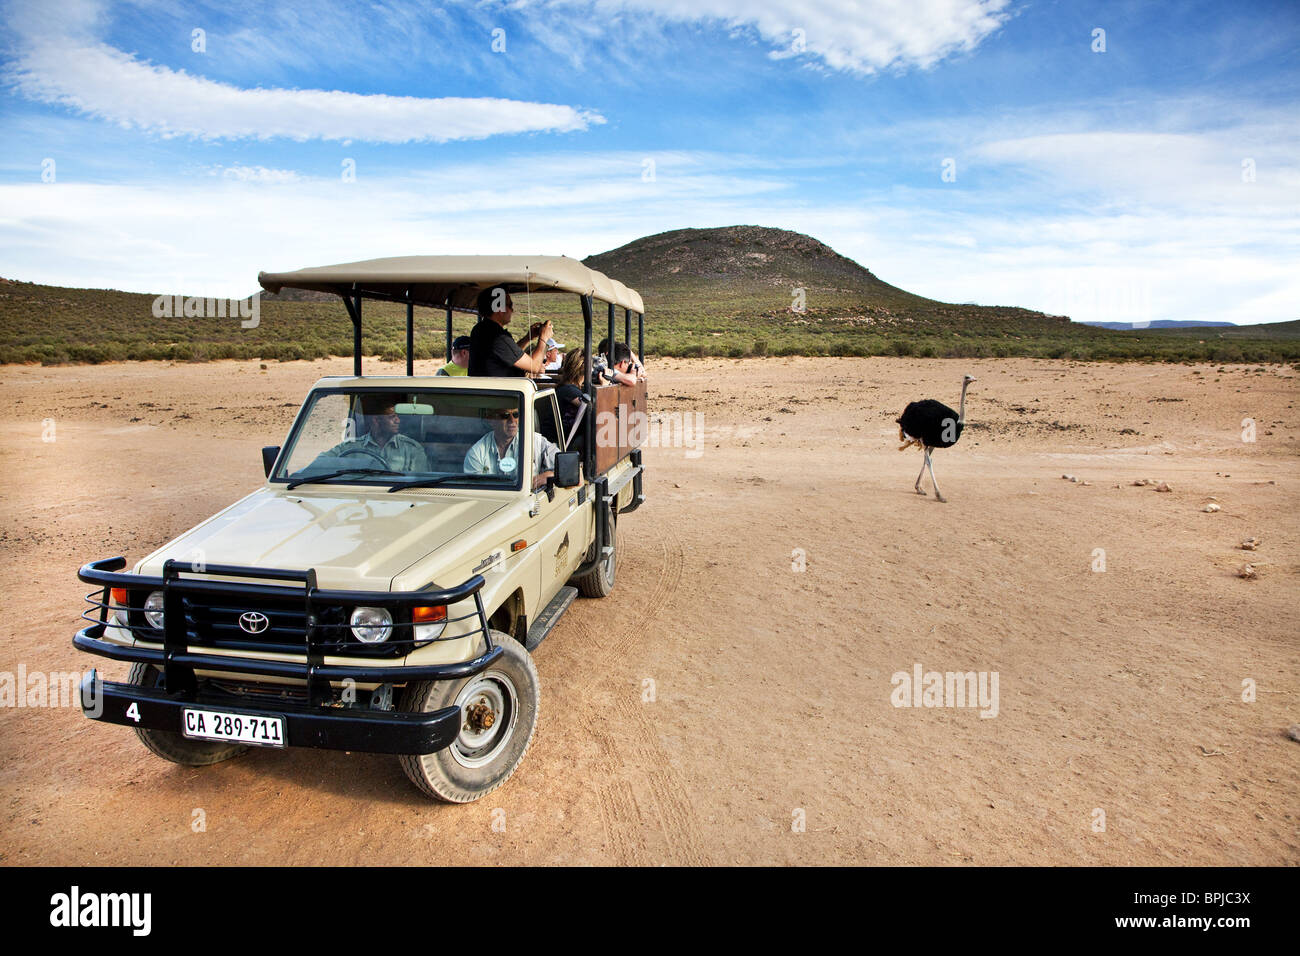 Tourists On A Safari Watching An Ostrich Aquila Lodge Cape Town